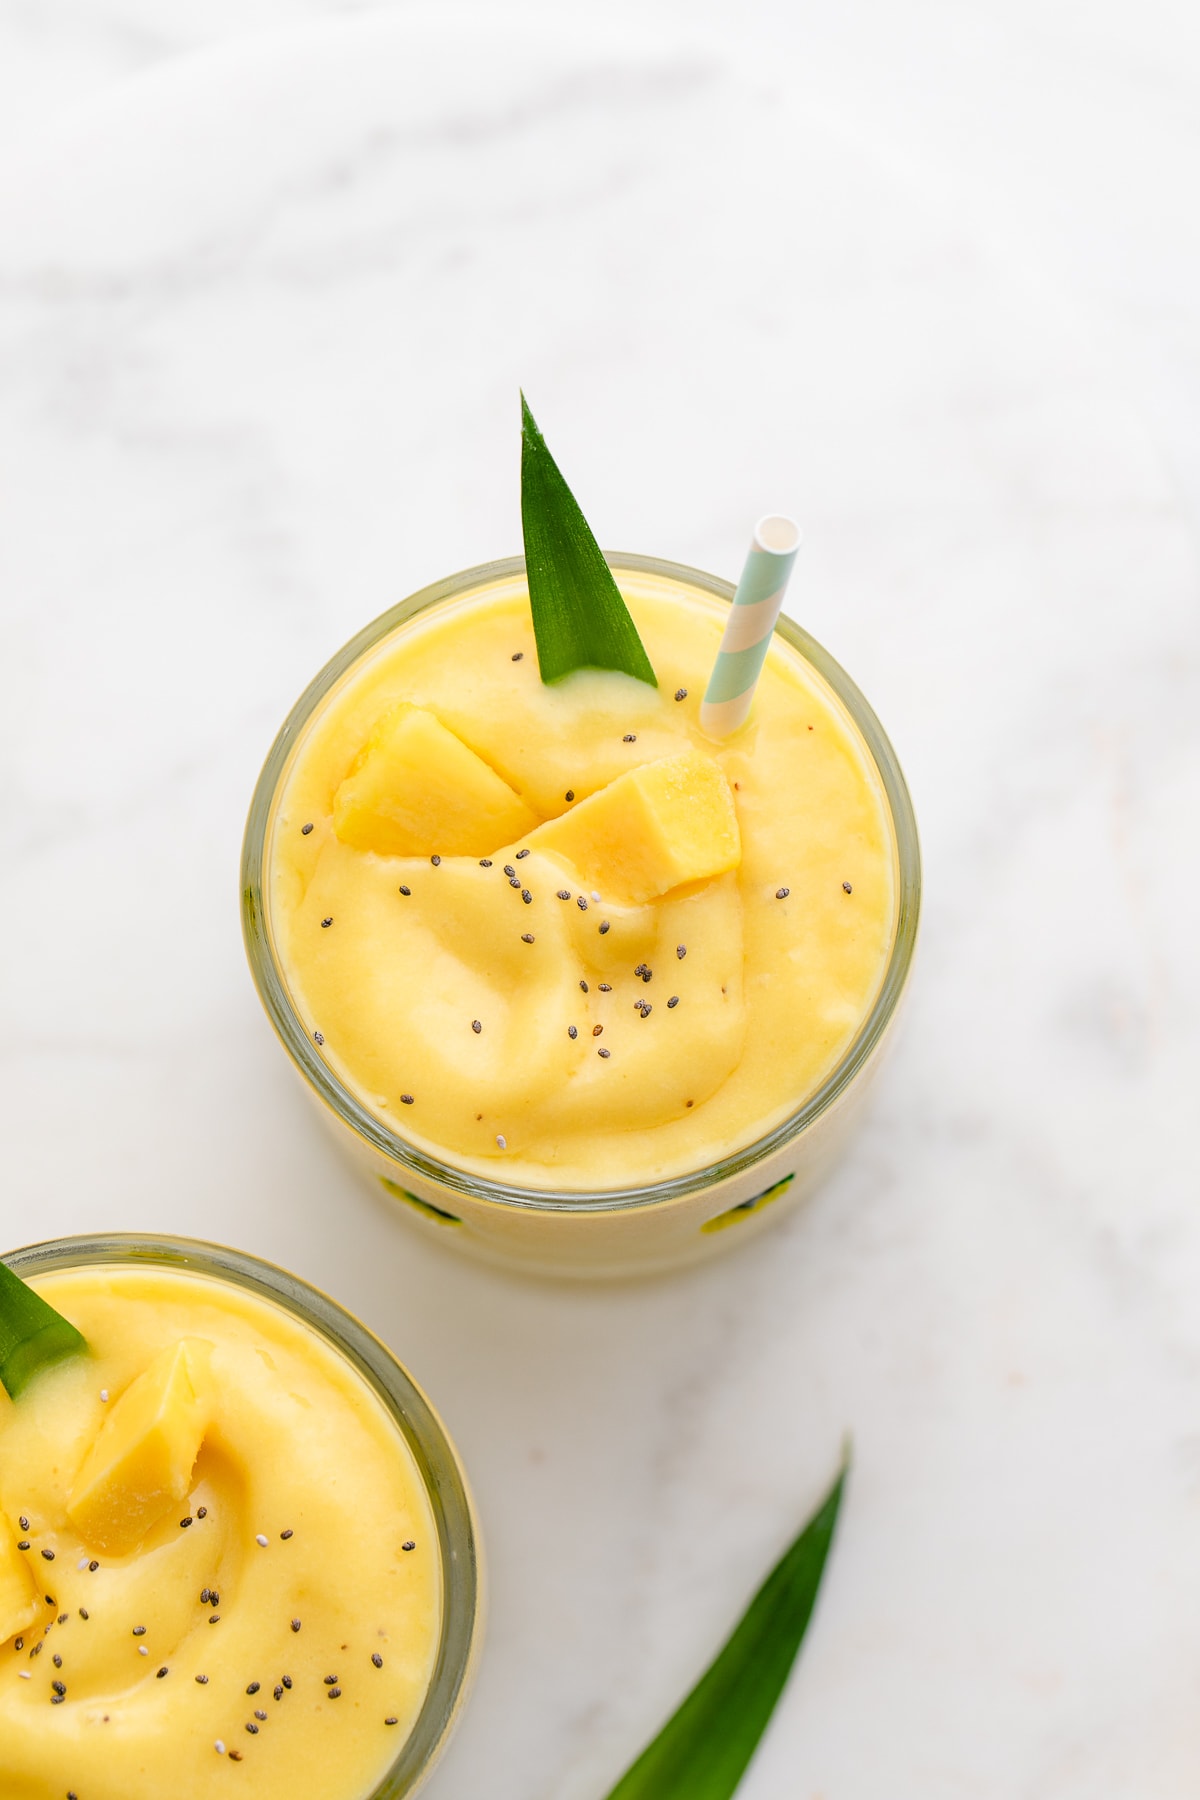 top down view of pineapple mango banana smoothie in a glass.